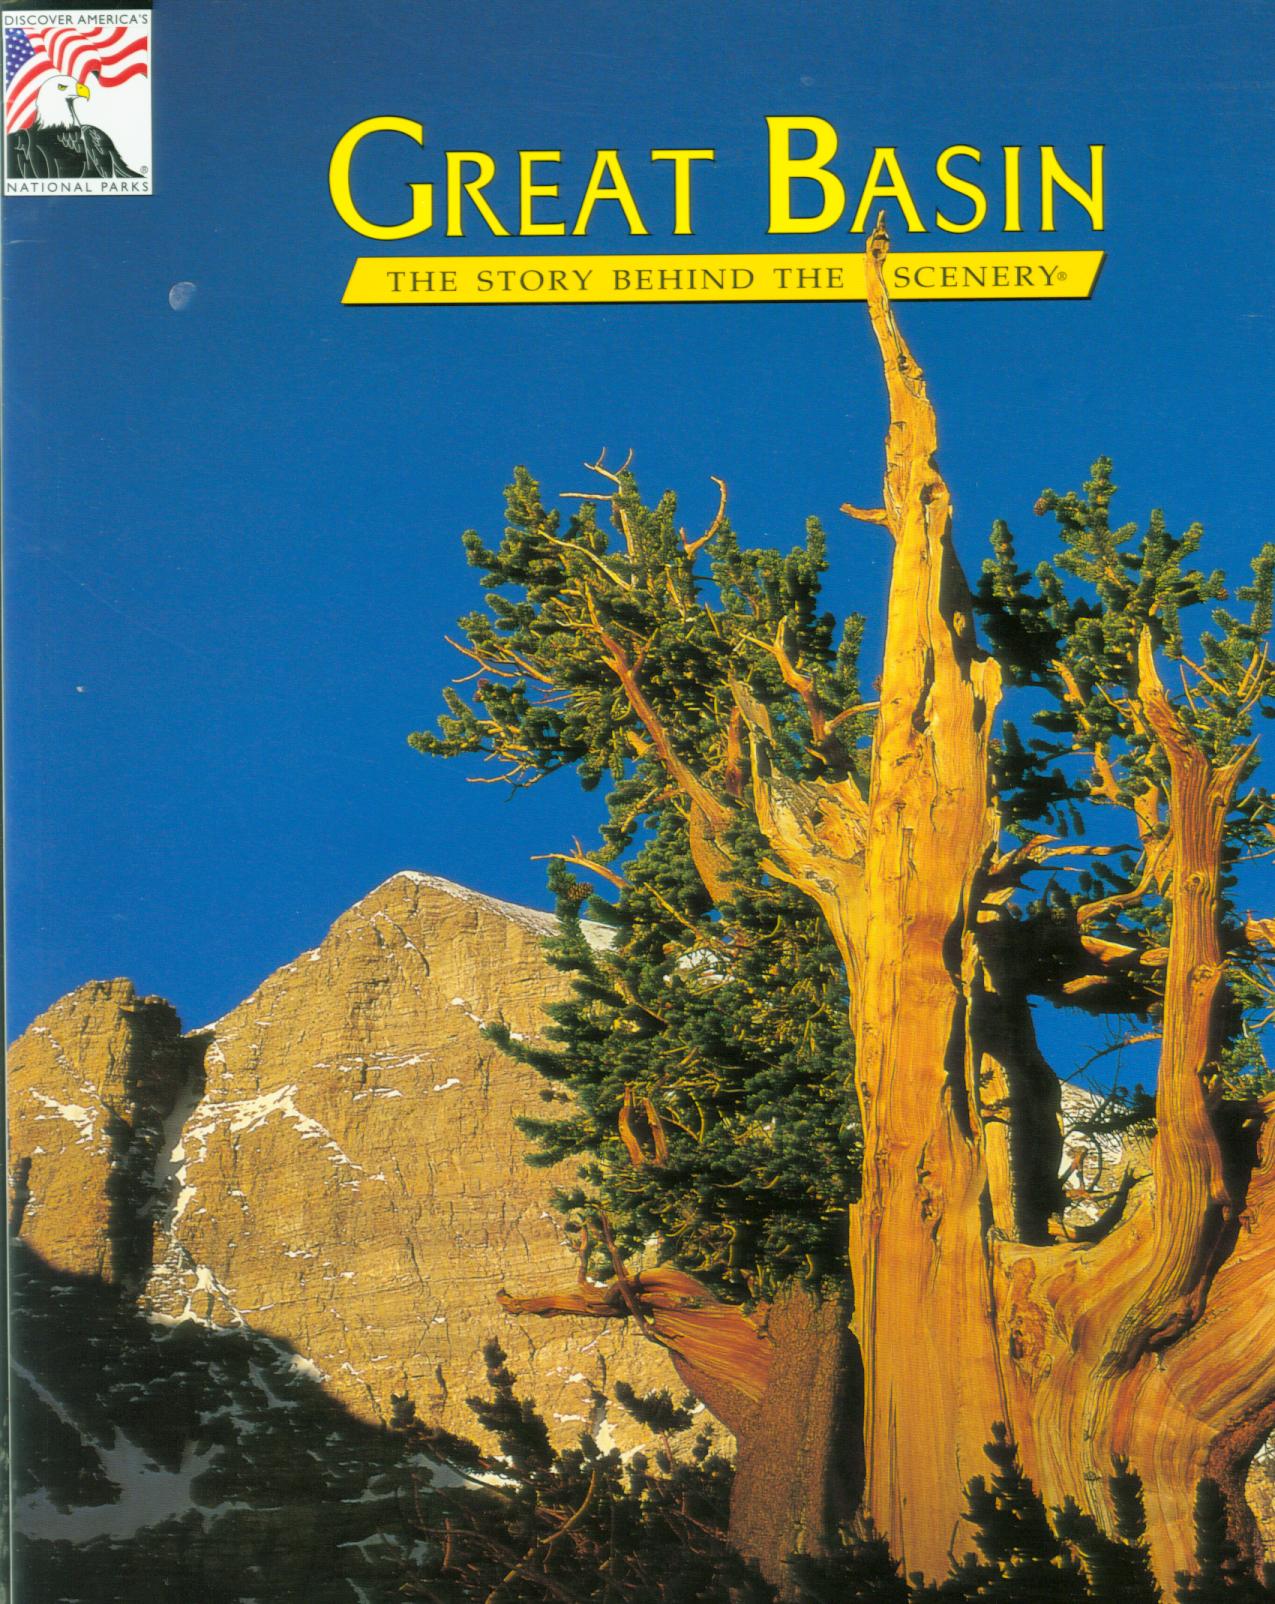 GREAT BASIN: the story behind the scenery (NV). 